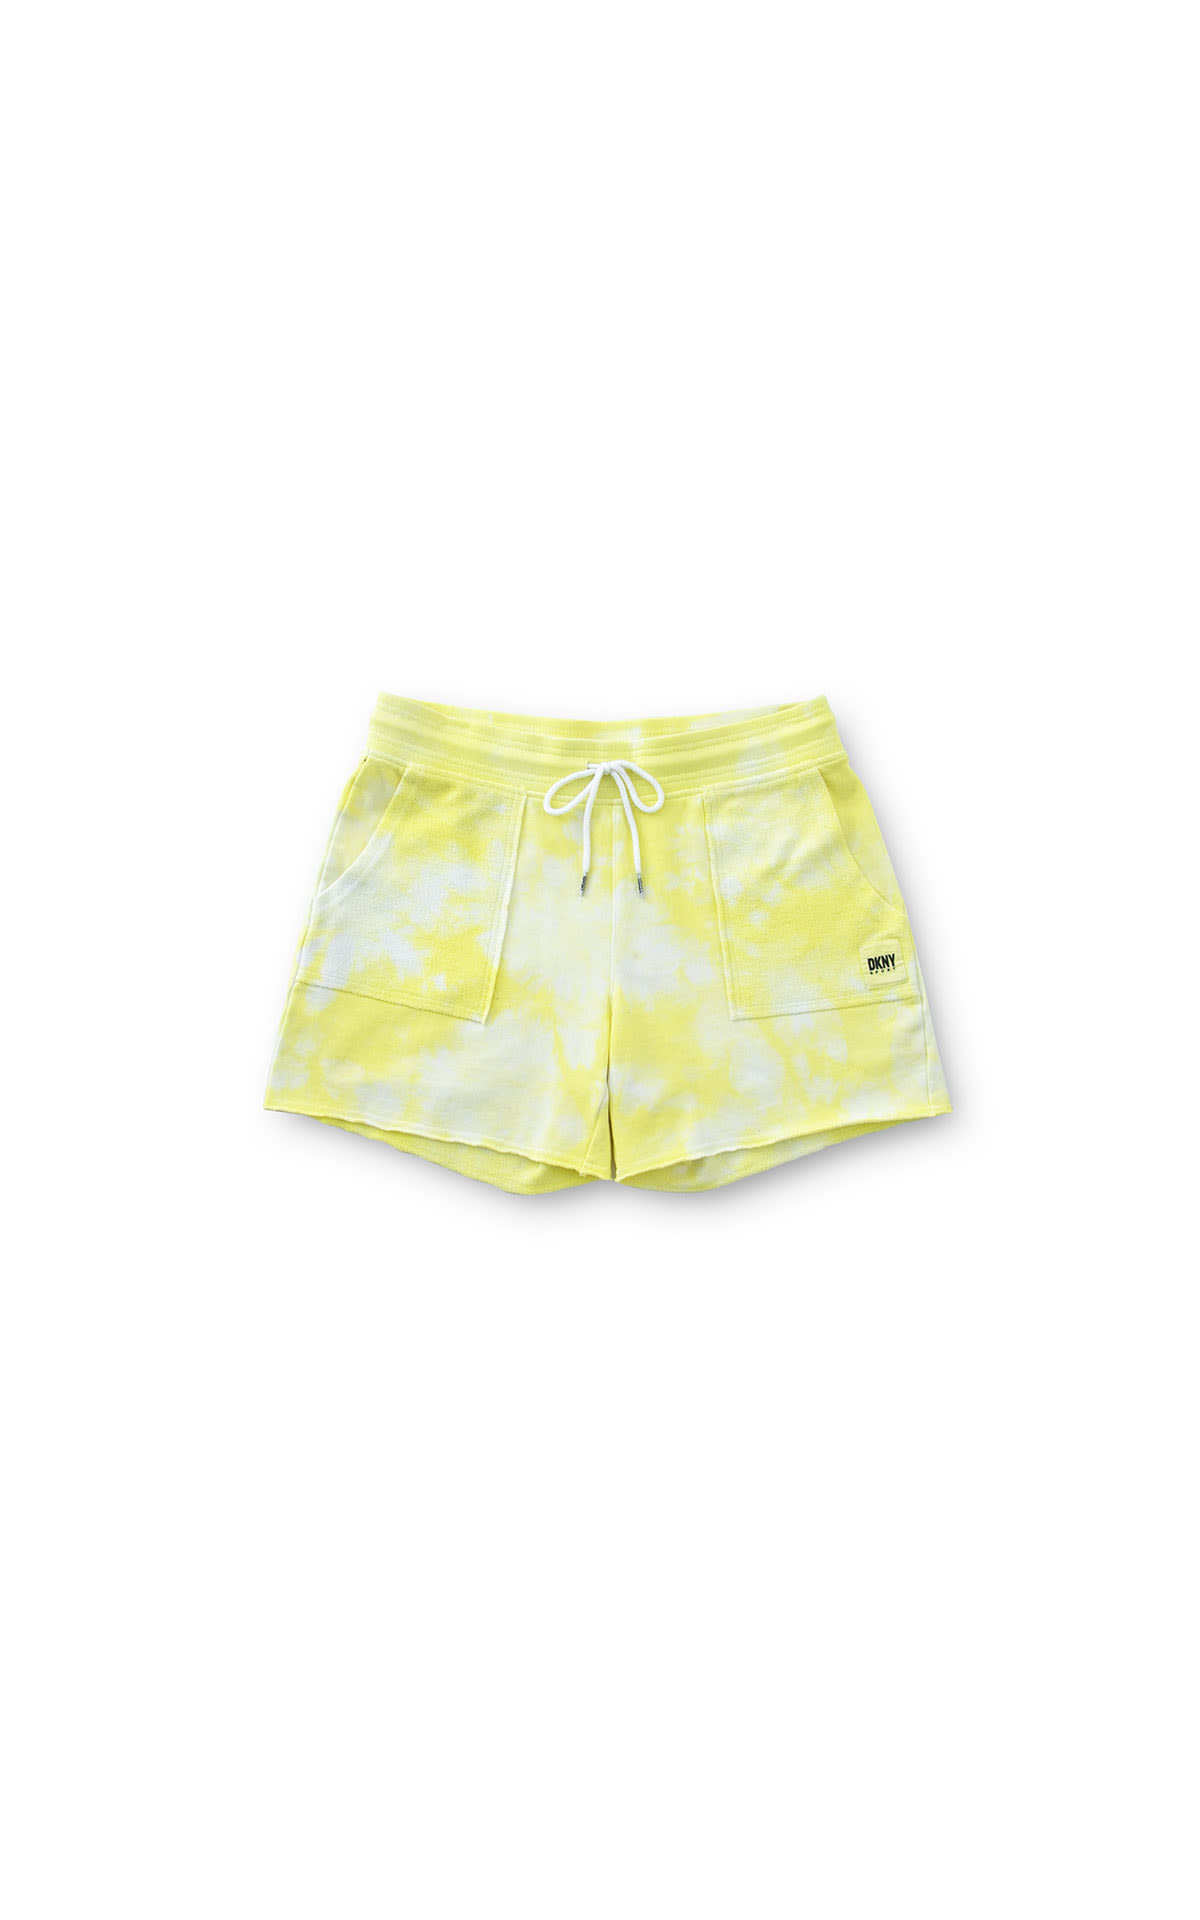 DKNY Tie dye shorts from Bicester Village